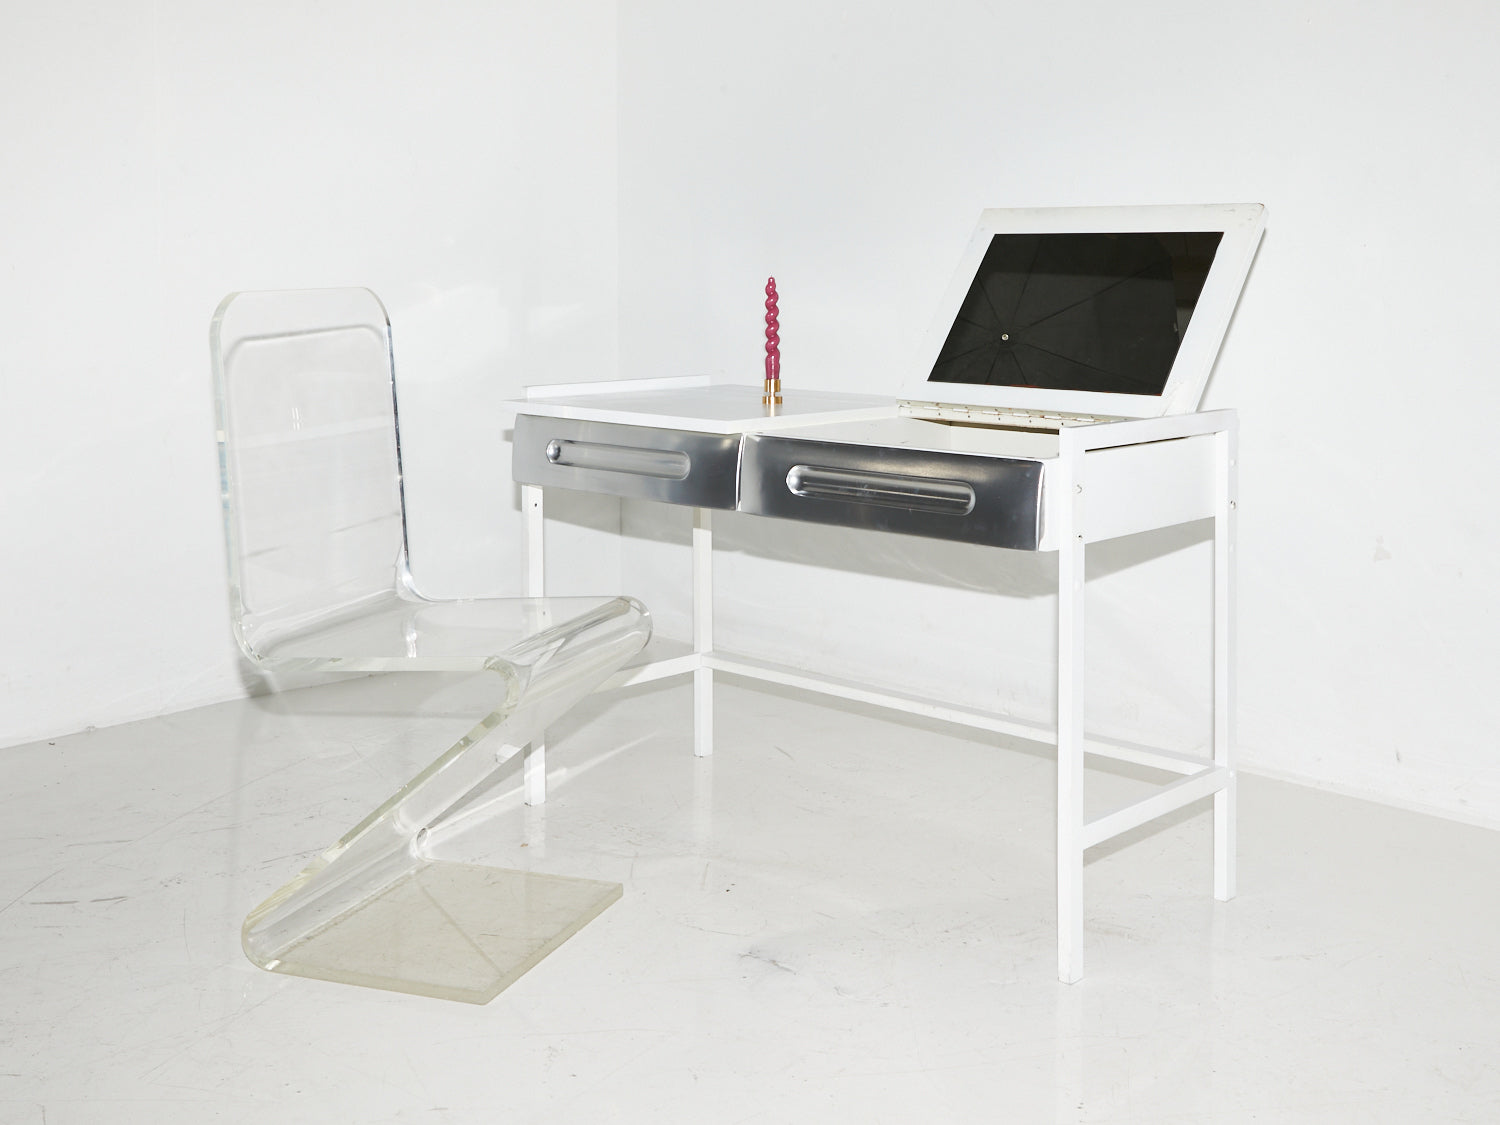 White flip-top desk in the style of Raymond Loewy with silver drawer fronts